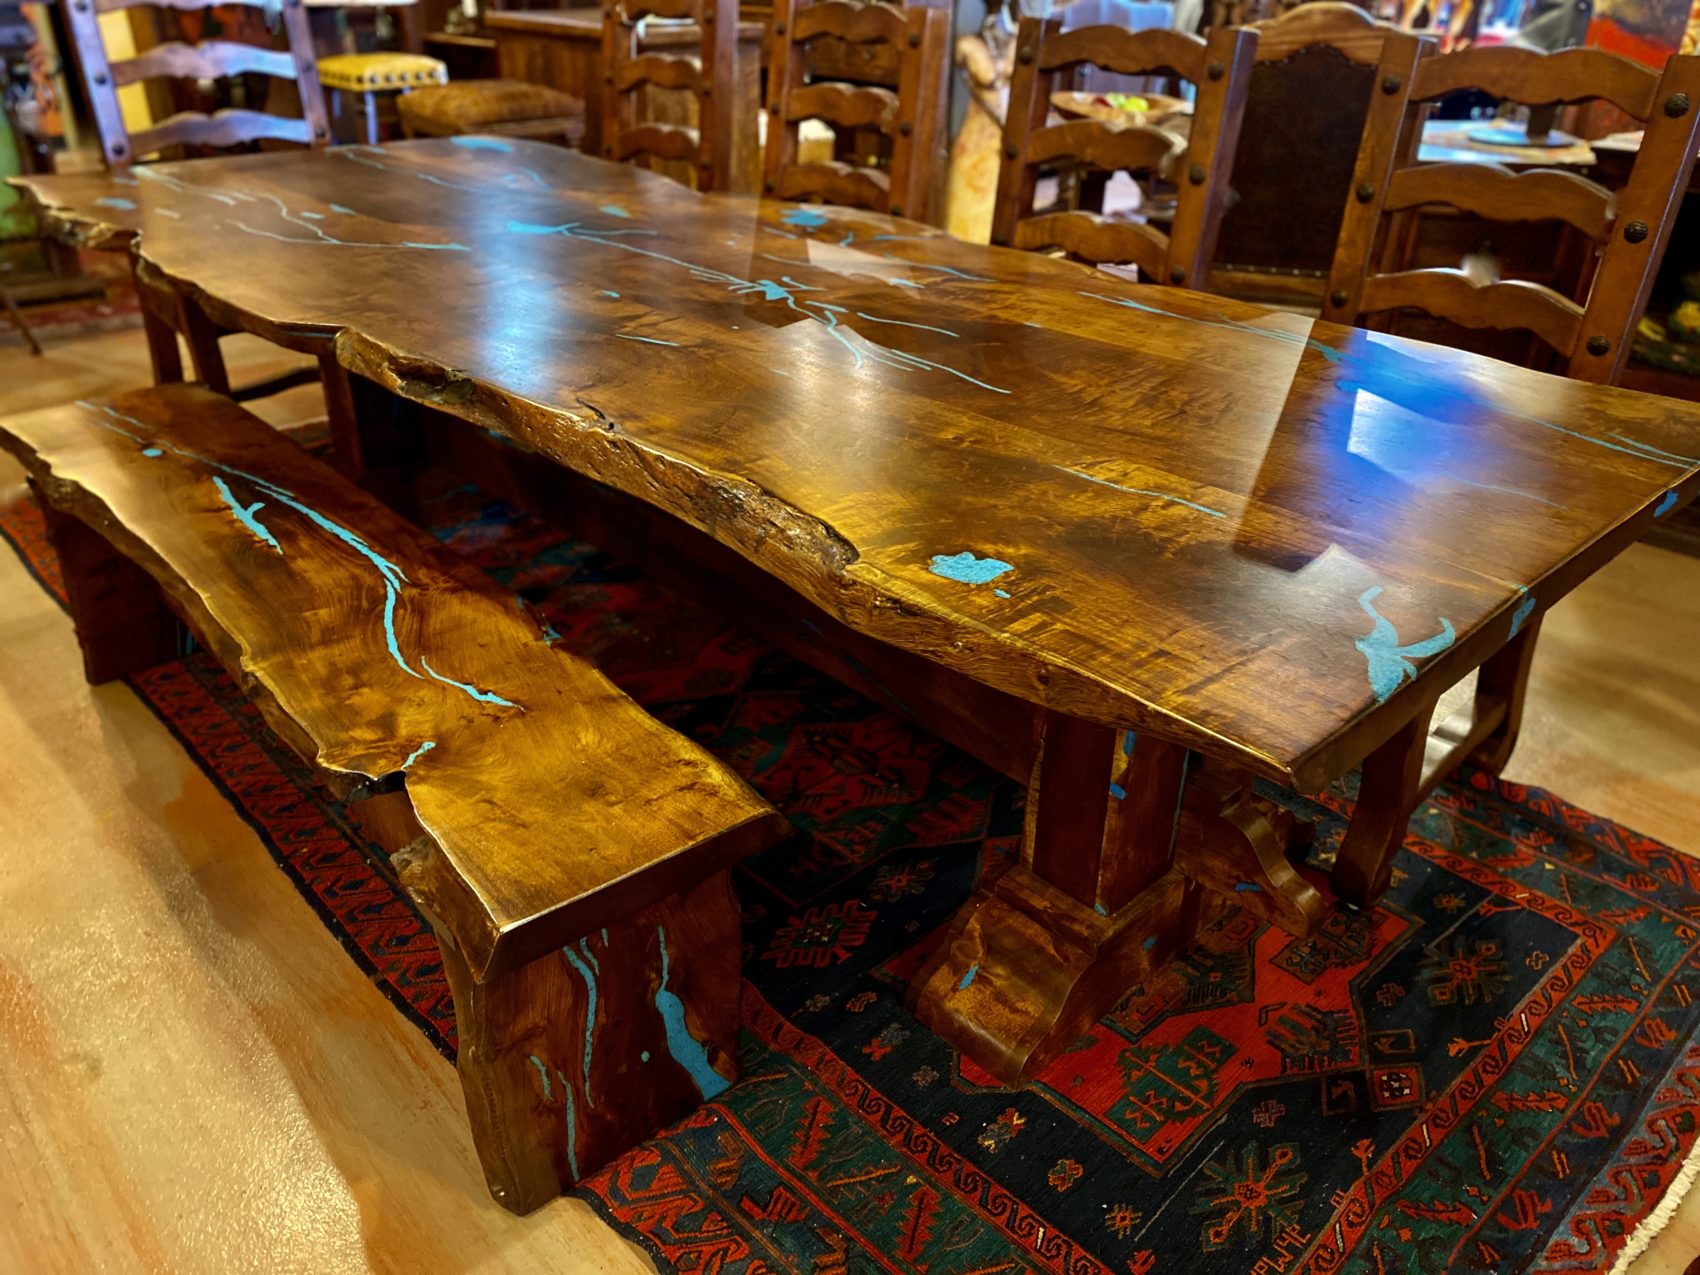 Free Form Mesquite Turquoise Inlay Table